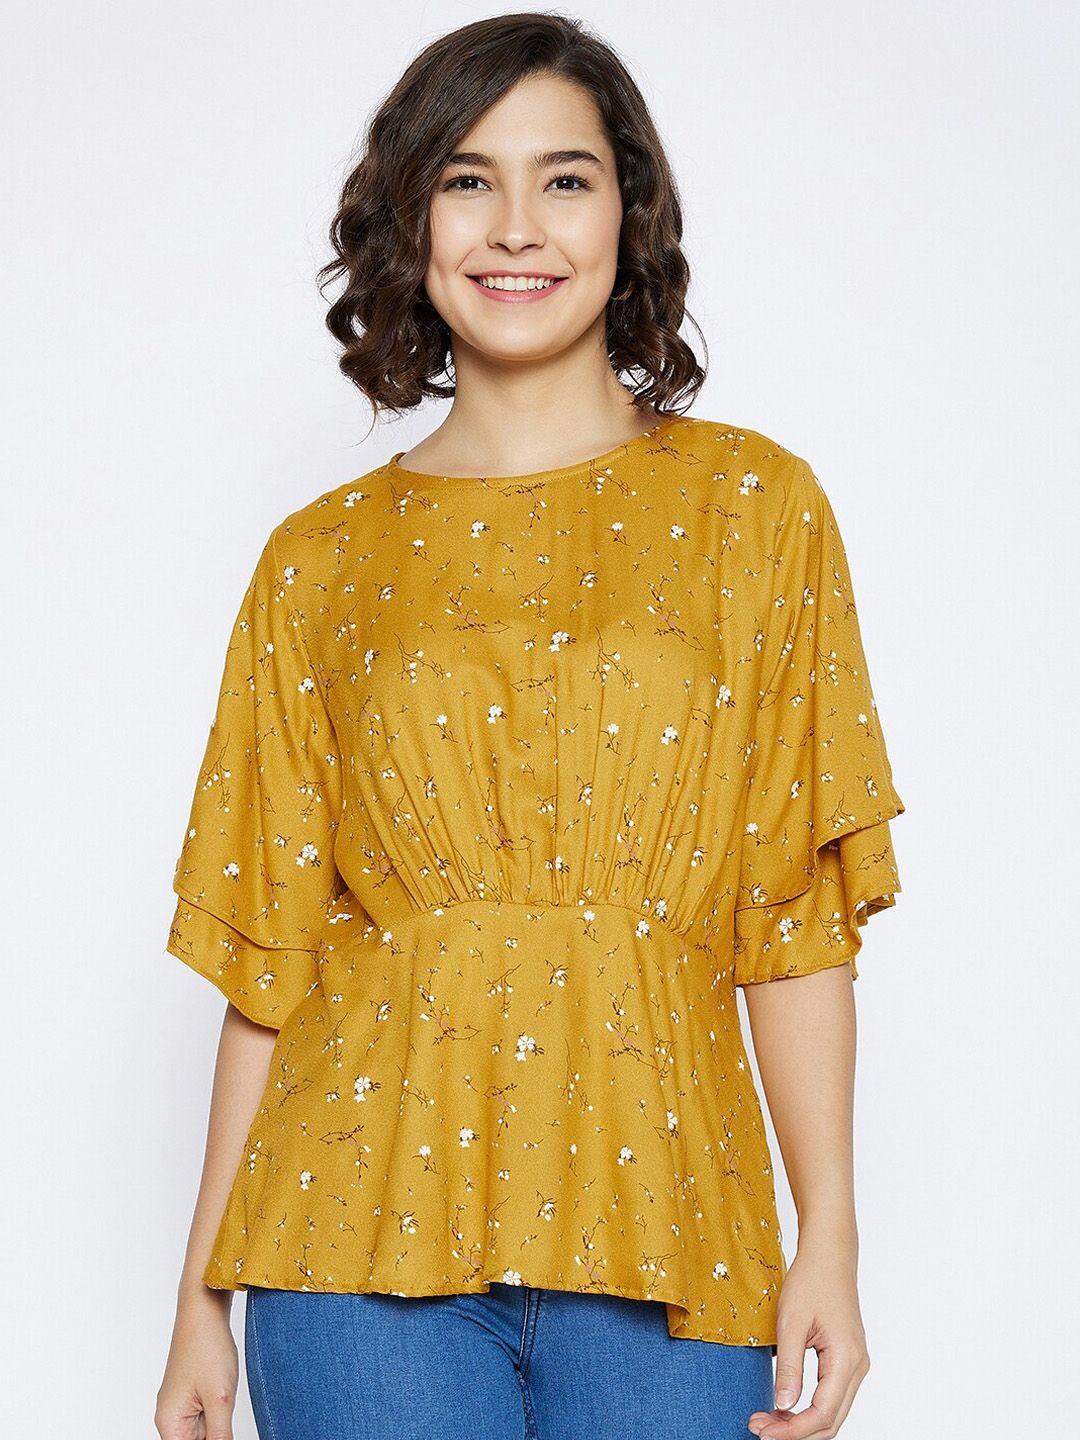 crimsoune club mustard yellow geometric extended sleeves cinched waist top